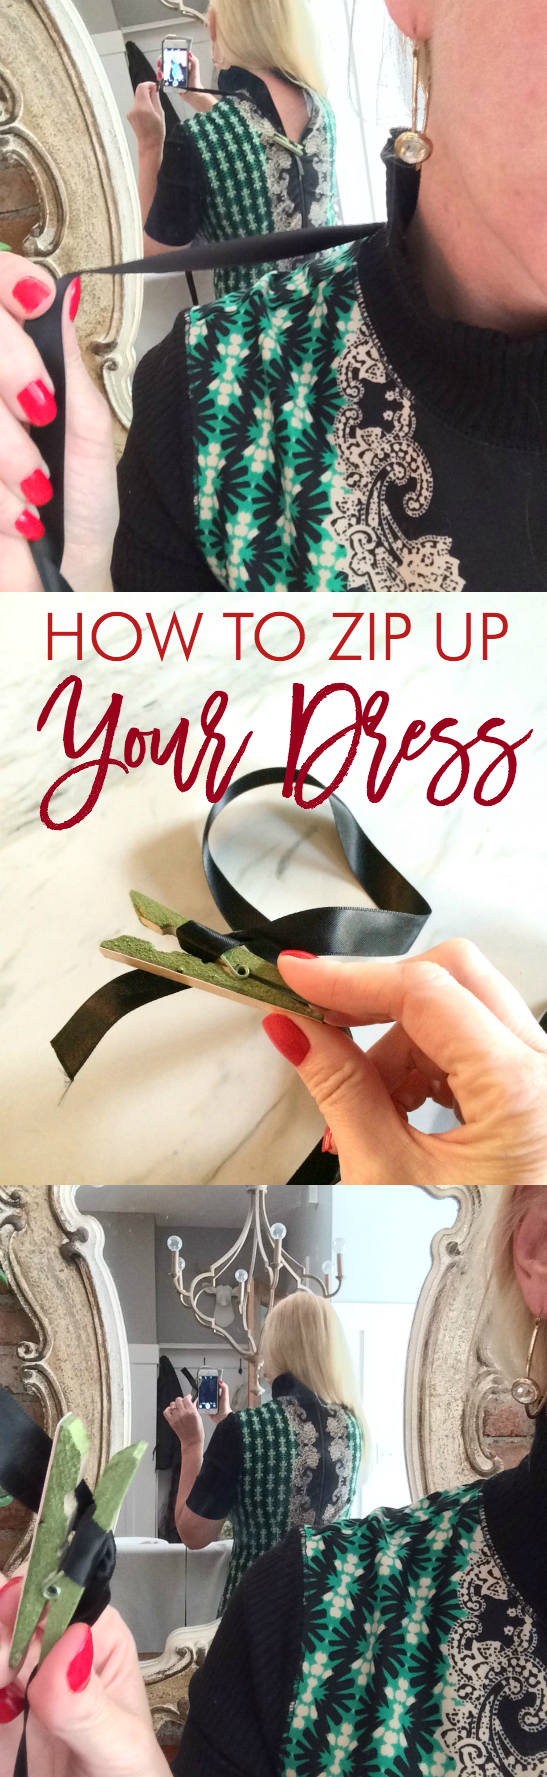 How to zip up your dress by yourself